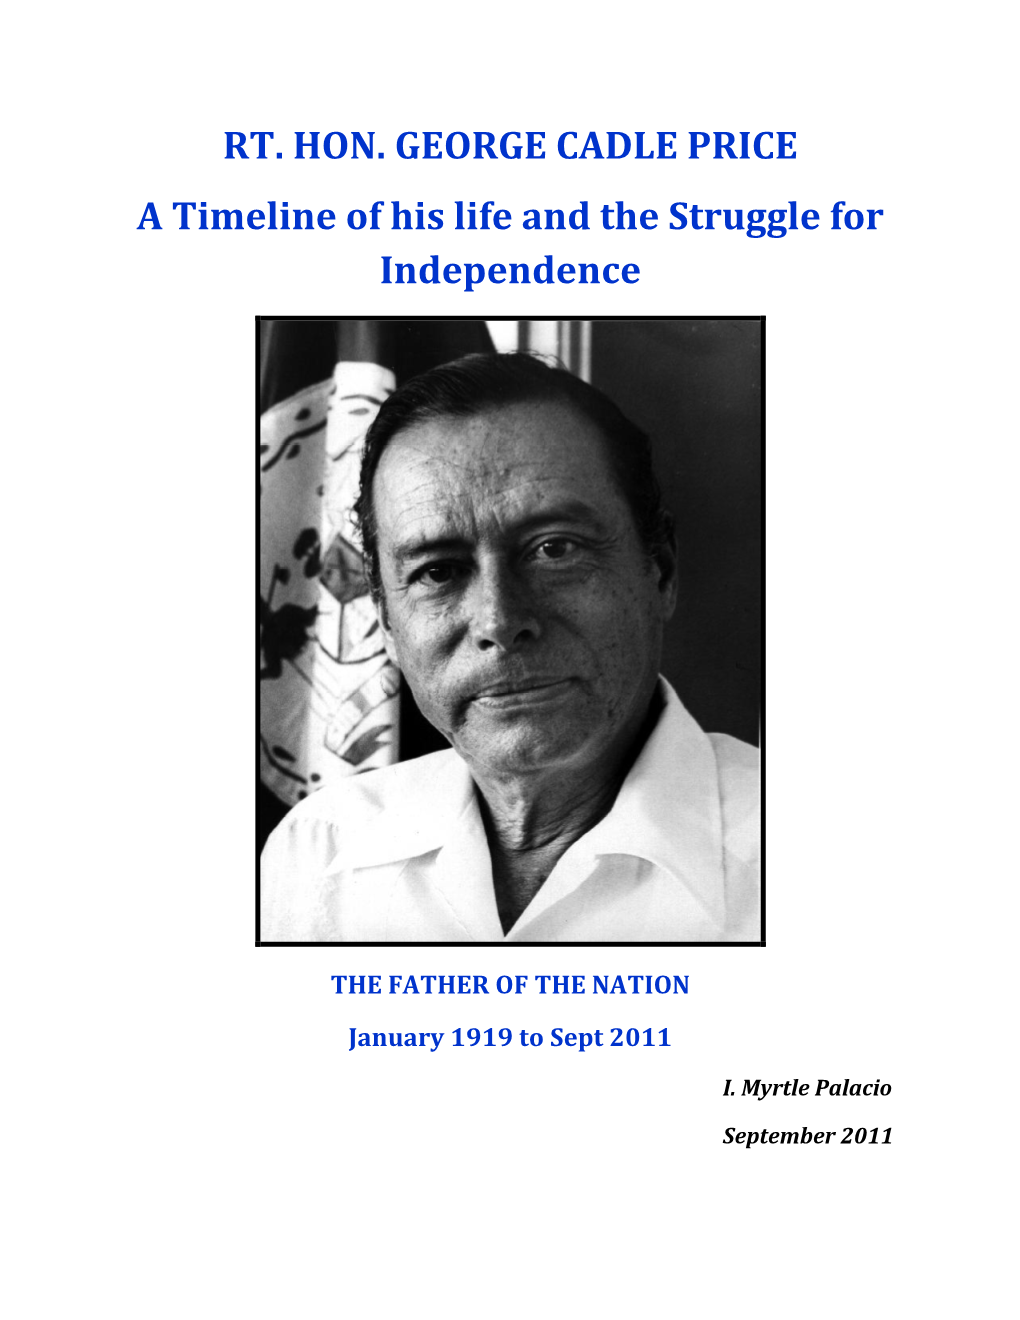 RT. HON. GEORGE CADLE PRICE a Timeline of His Life and the Struggle for Independence